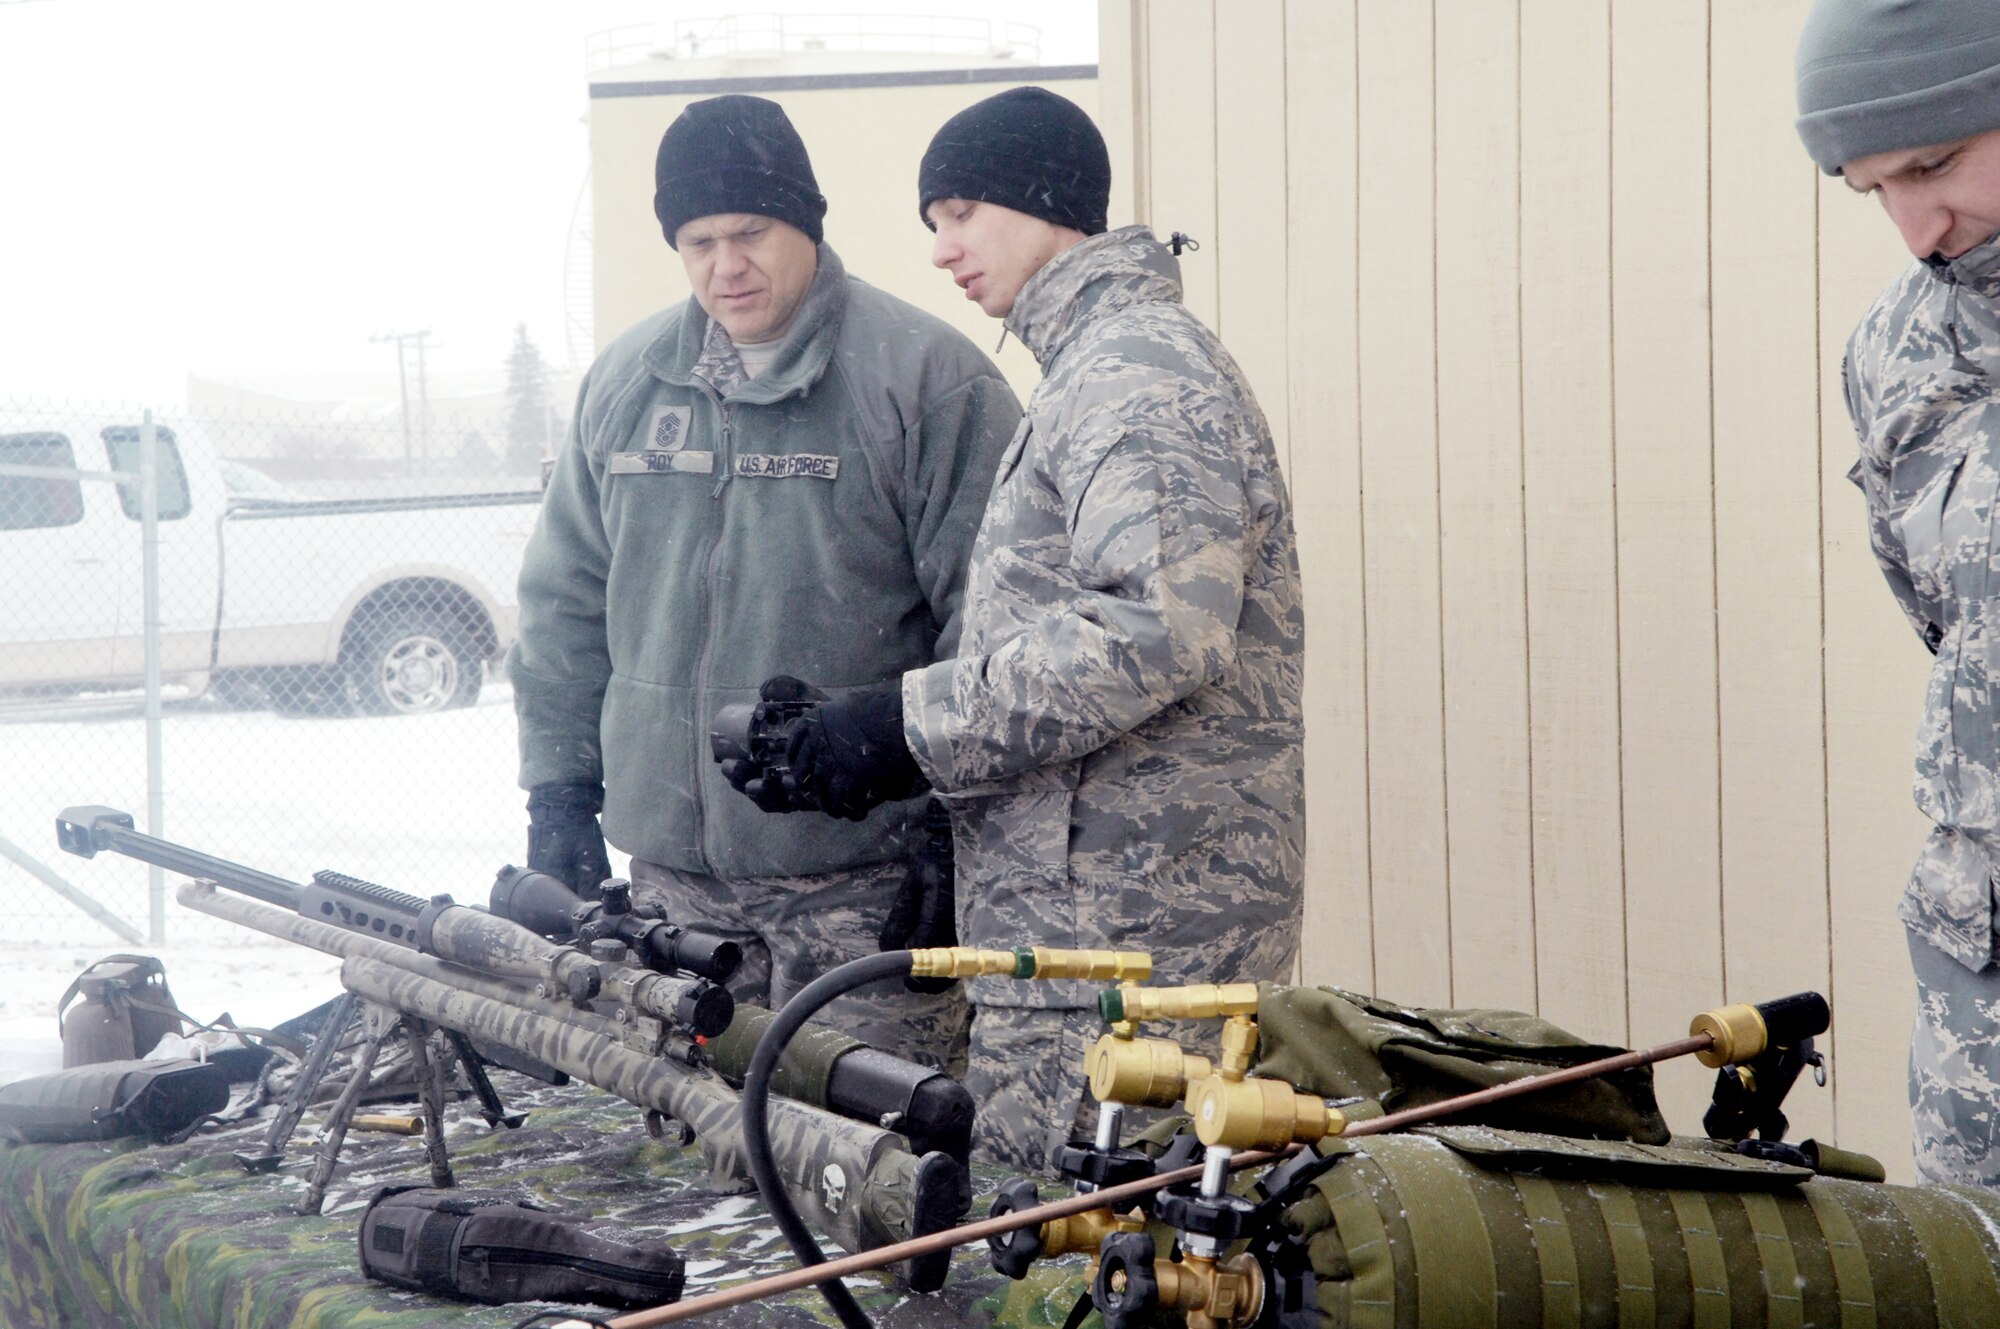 Chief Master Sgt. of the Air Force James Roy is shown weapon equipment Dec. 24, 2009, by Airman First Class Justin Allison from the 91st Missile Security Forces Squadron at Minot Air Force Base, N.D.  Chief Roy spent the Christmas holiday there and used the opportunity to meet Airmen from both the 5th Bomb Wing and the 91st Missile Wing and tell them their work in the nuclear enterprise is critical and that Air Force leaders are committed to their development.  (U.S. Air Force photo/Senior Airman Jesse Lopez)